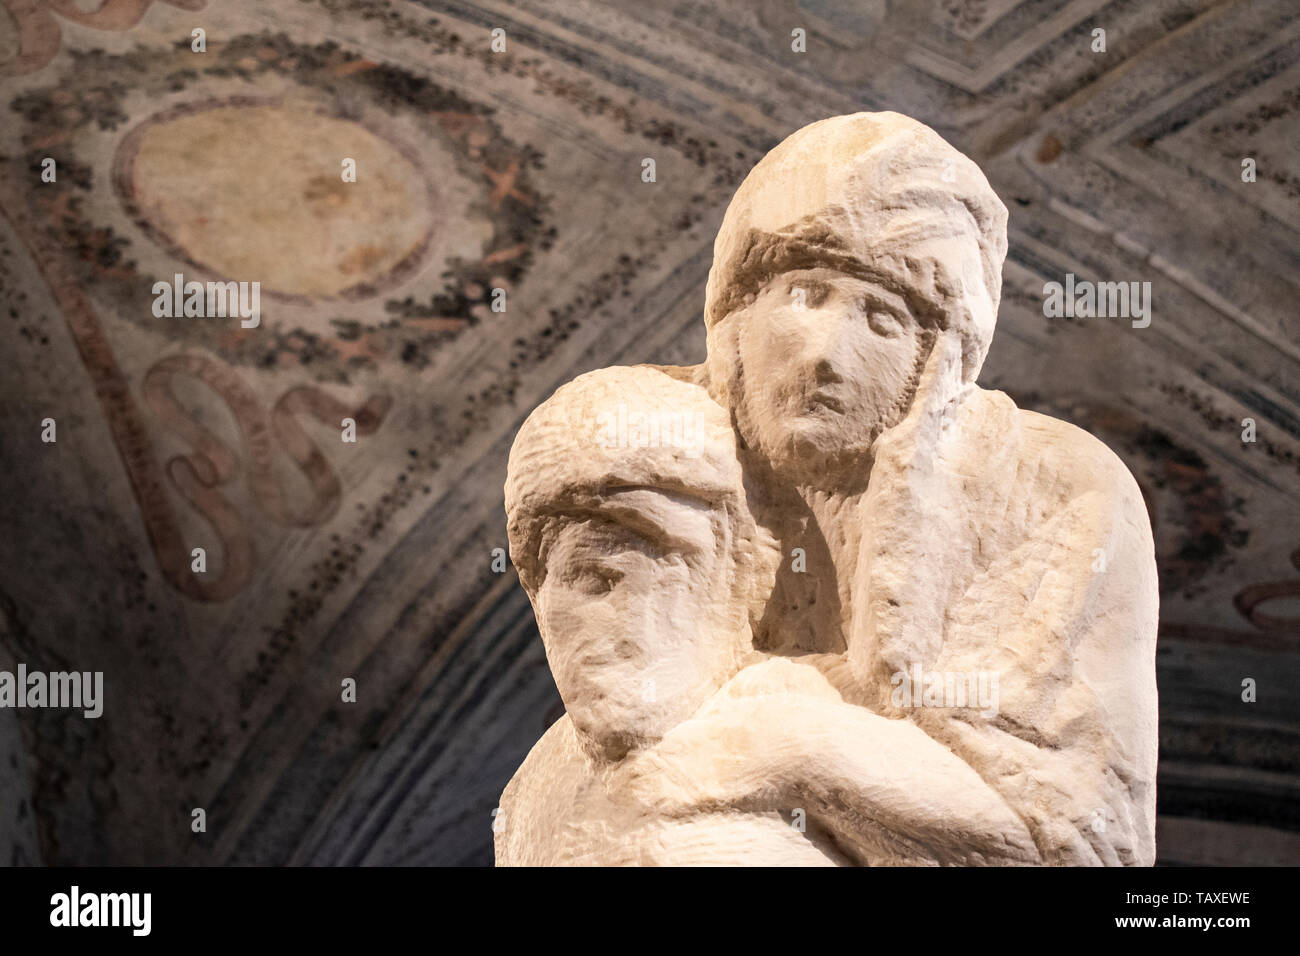 Sforza Castle, museum, Milan: details of The Rondanini Pietà, sculpture that Michelangelo Buonarroti worked on from 1552 until his death in 1564 Stock Photo